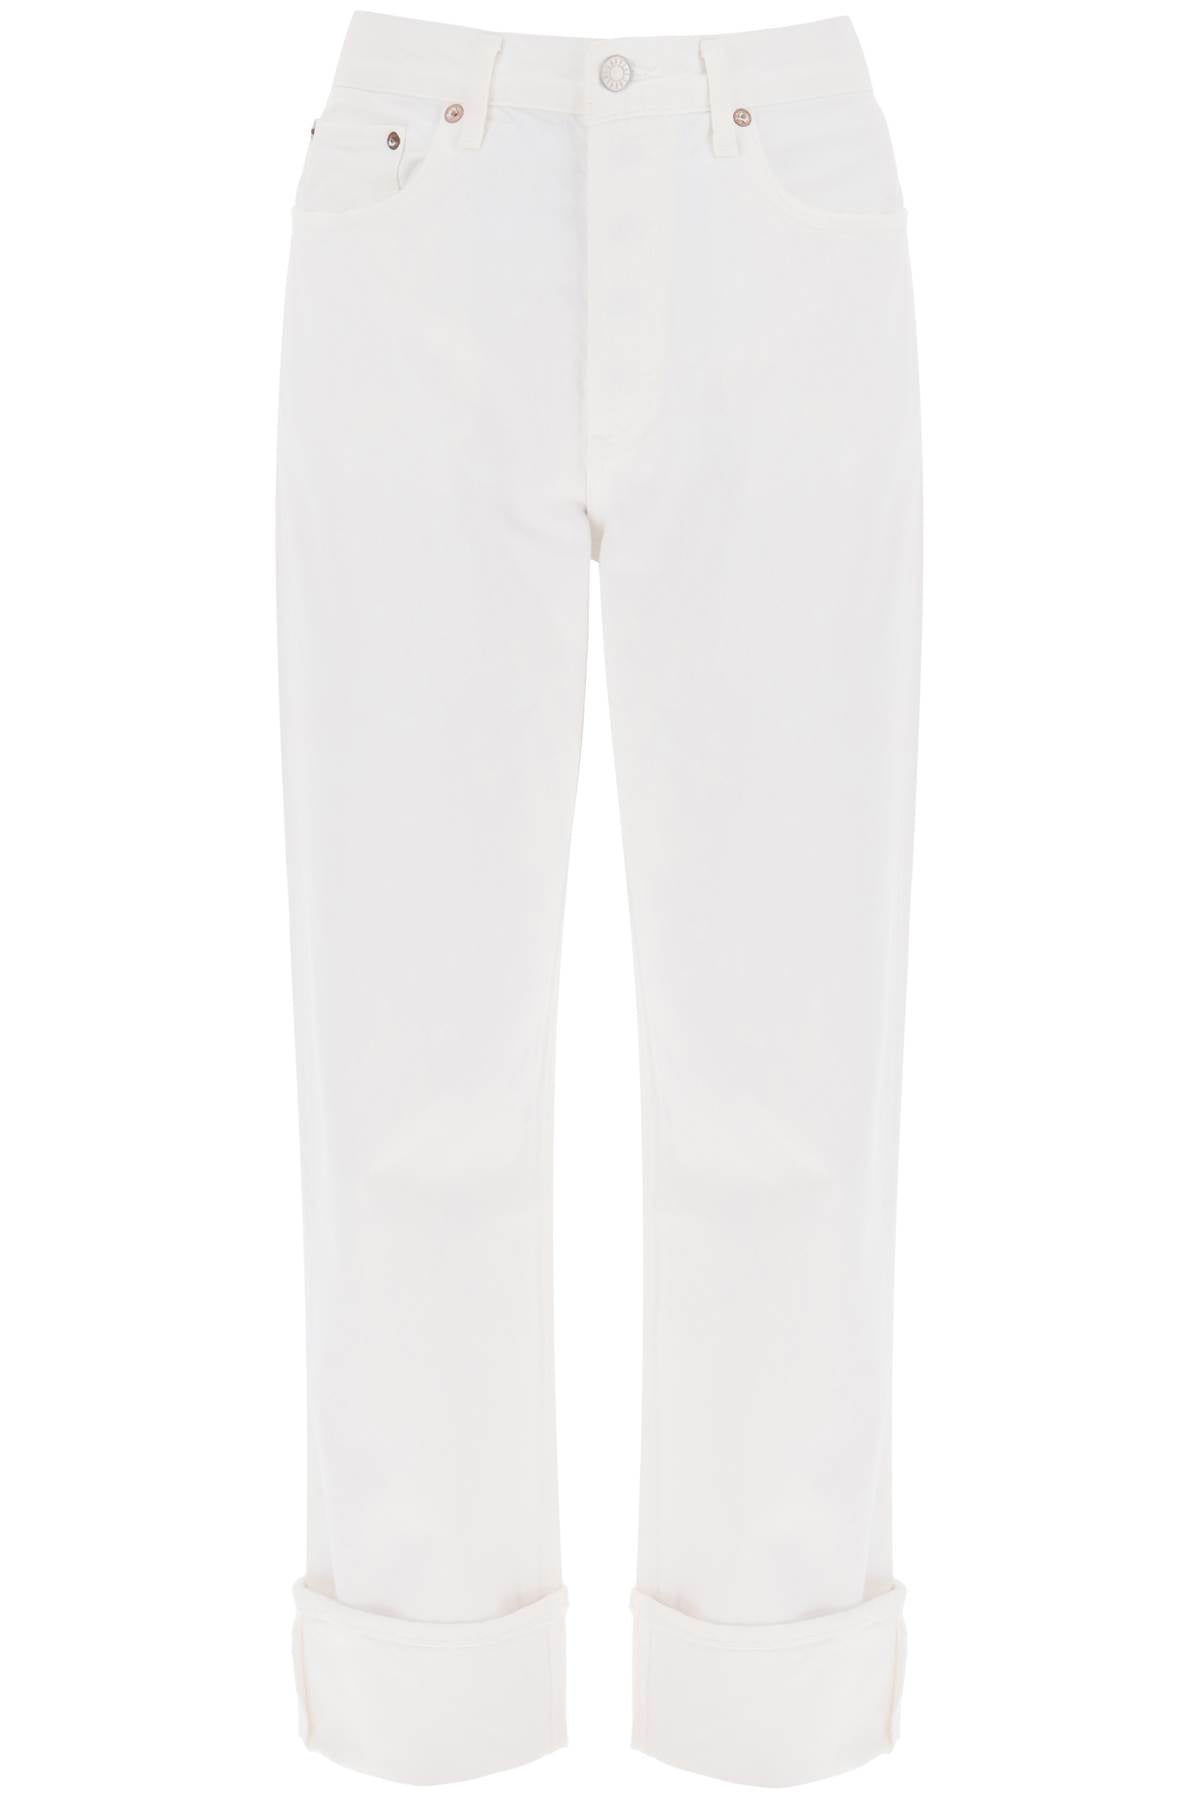 Agolde ca

straight leg jeans with low rise fran-0